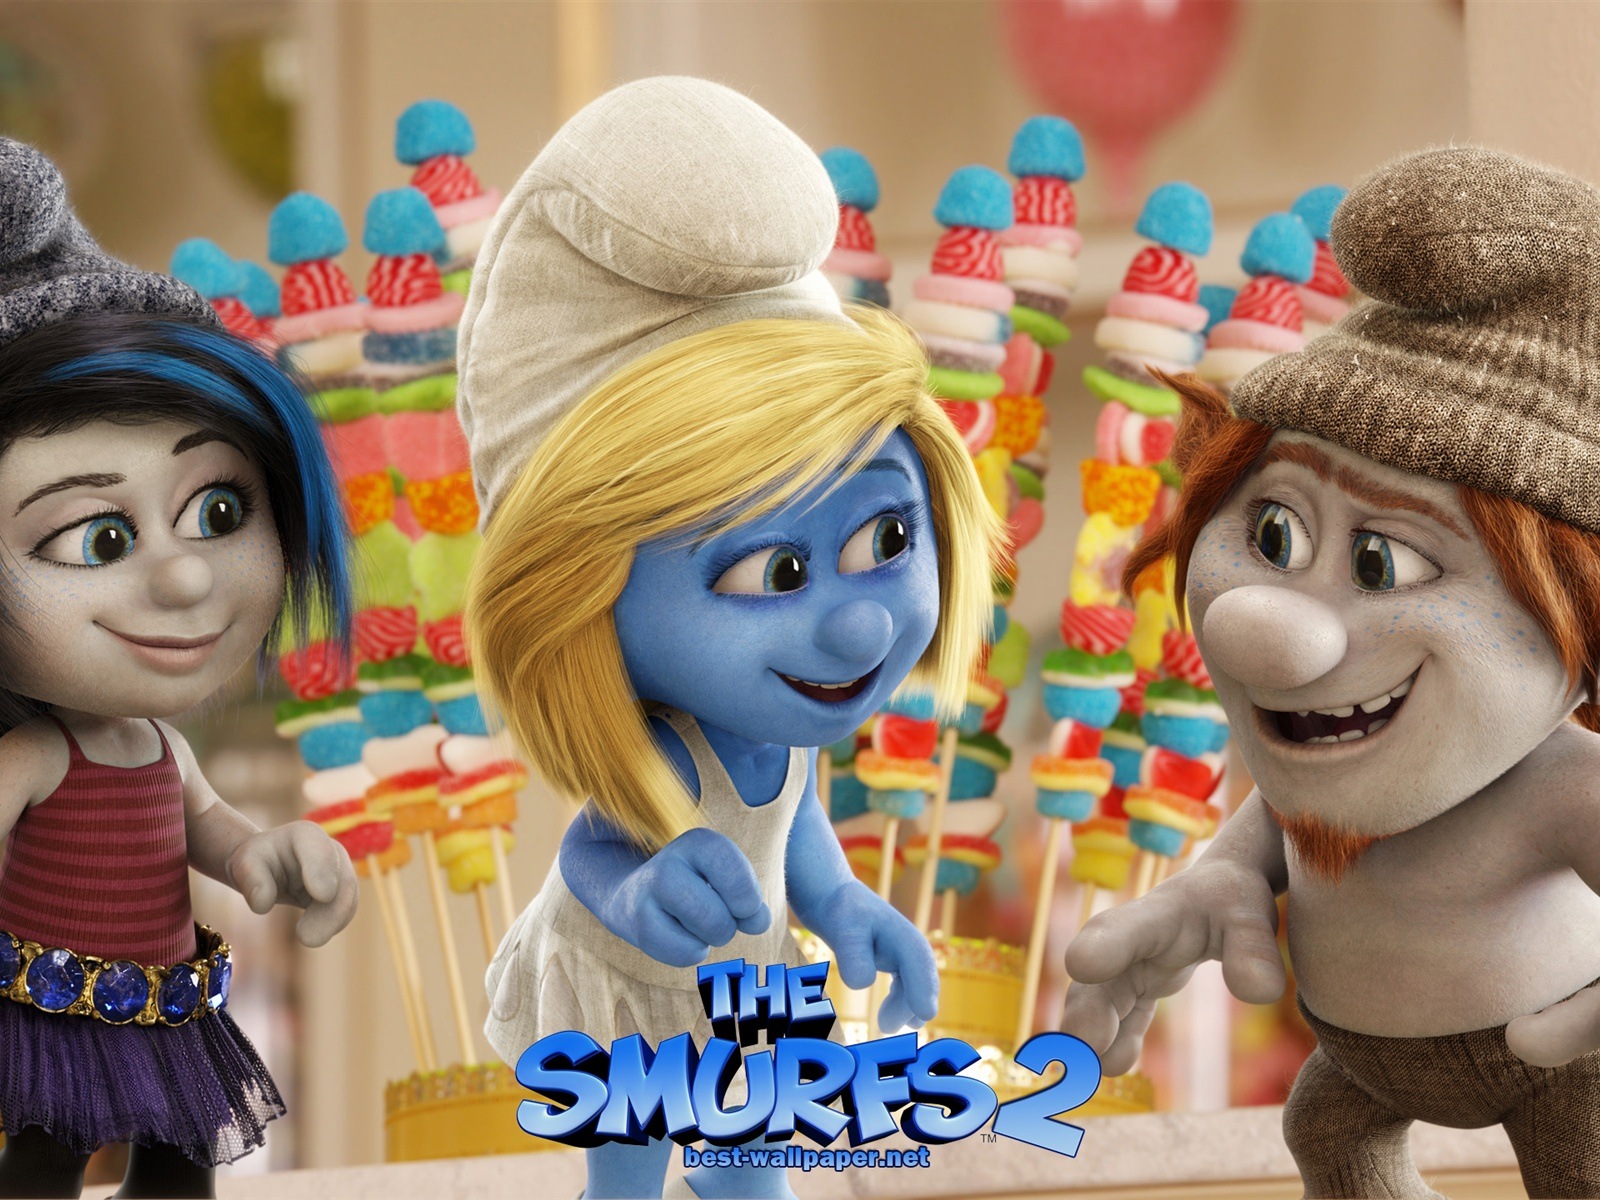 The Smurfs 2 HD movie wallpapers #5 - 1600x1200